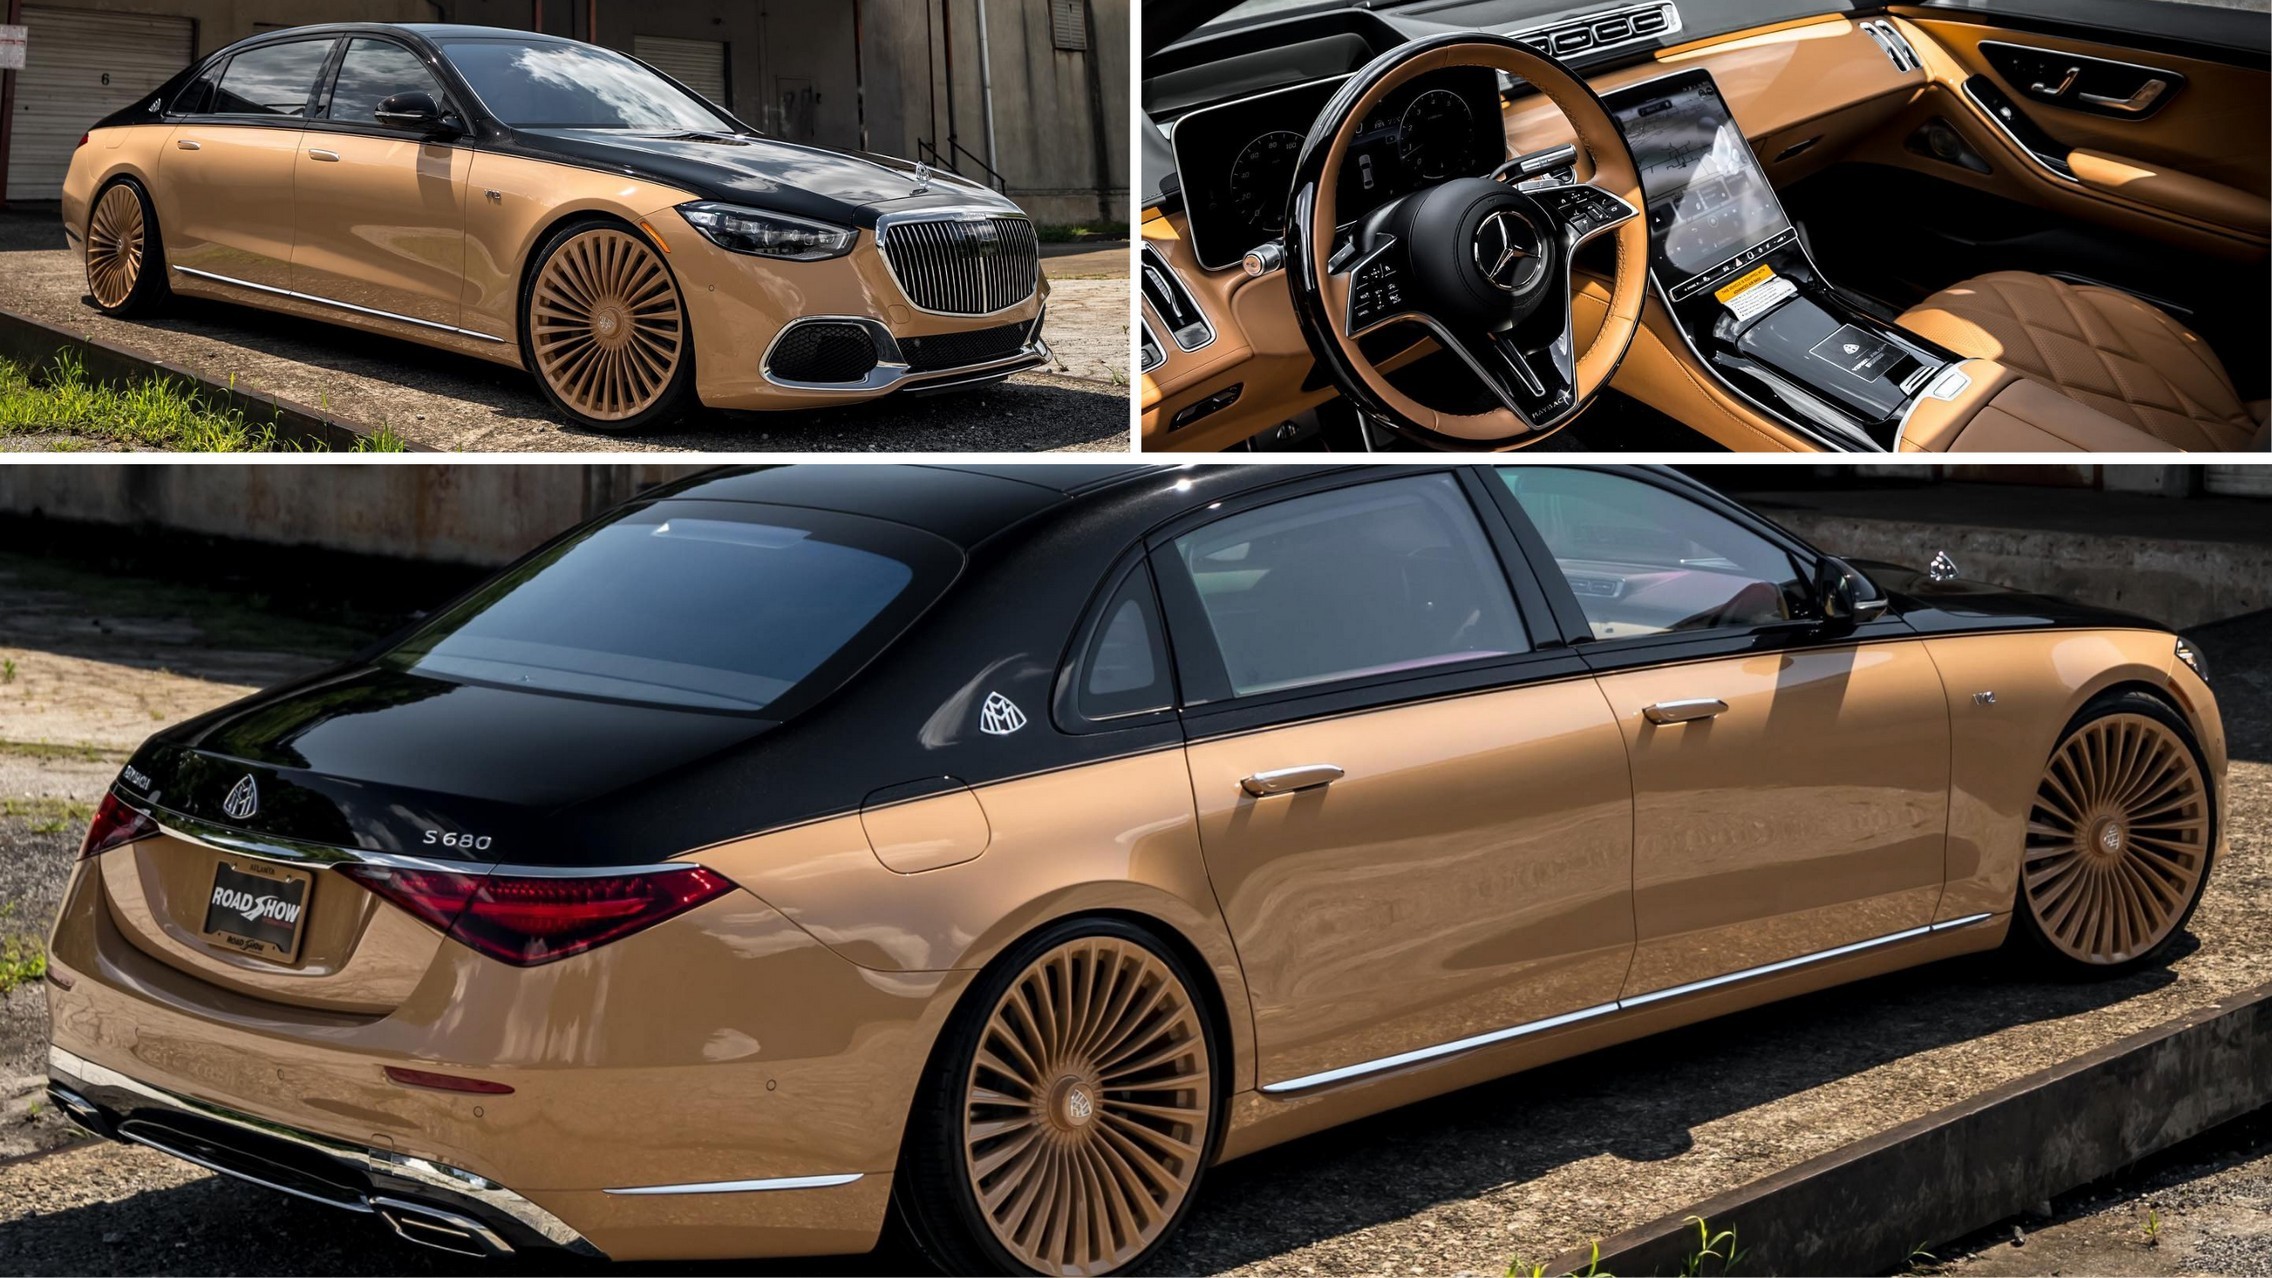 A closer look at the Mercedes-Maybach S-Class designed by Virgil Abloh